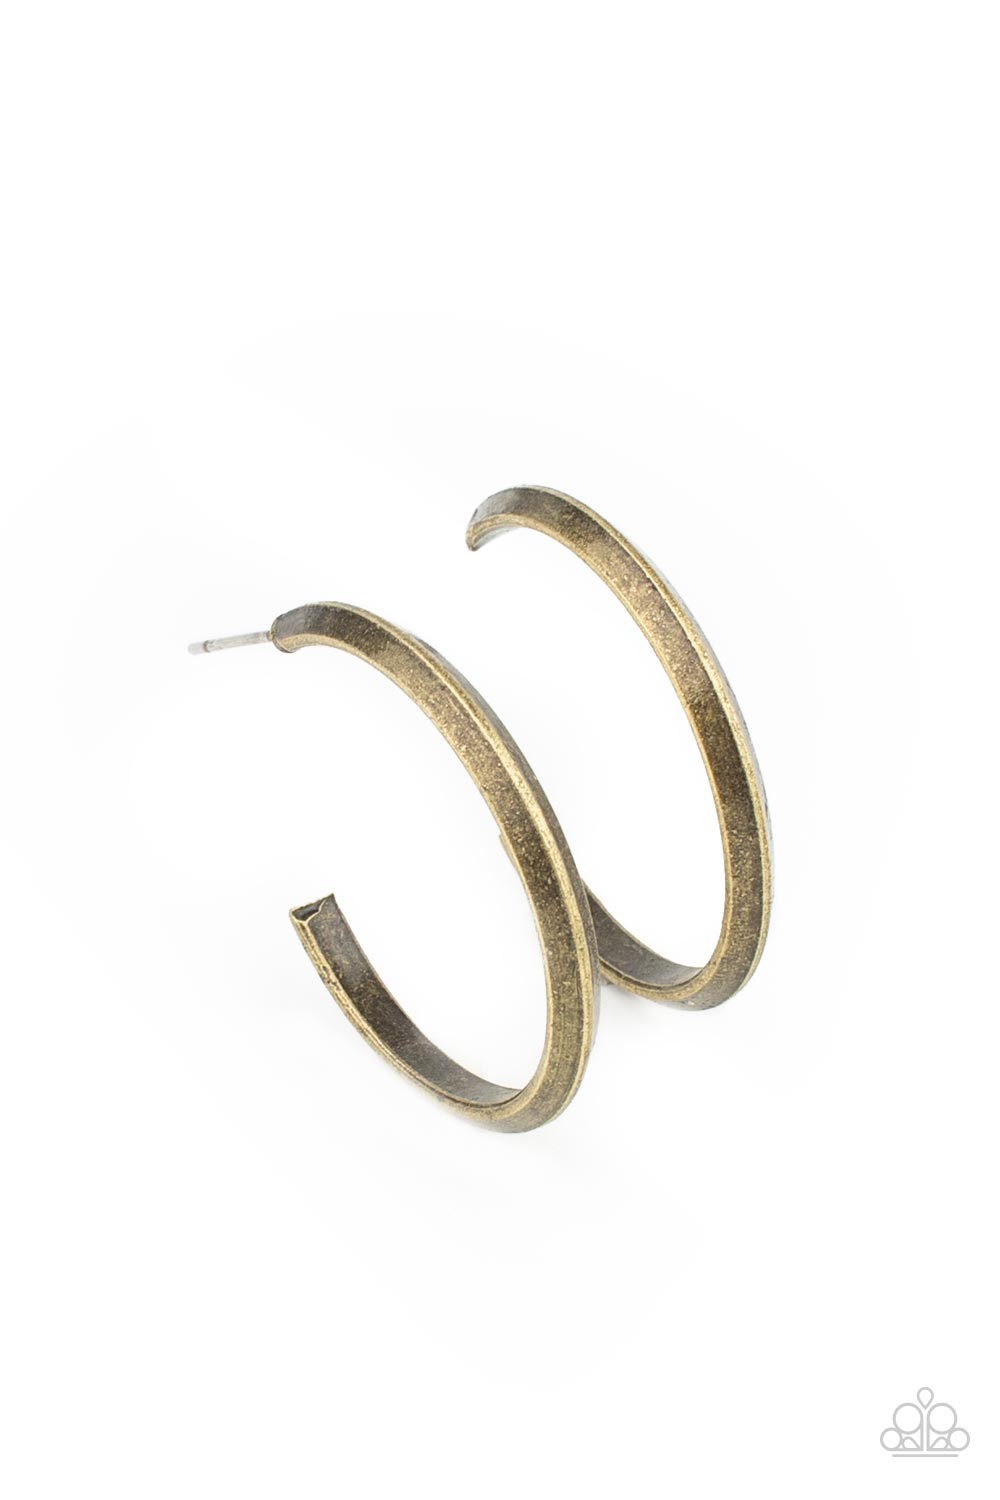 On The Brink - Brass Hoop Earrings - Paparazzi Accessories - A raised spine on an antiqued brass hoop creates a dramatic finish to the simple design. Earring attaches to a standard post fitting. Hoop measures approximately 1" in diameter. Sold as one pair of hoop earrings.